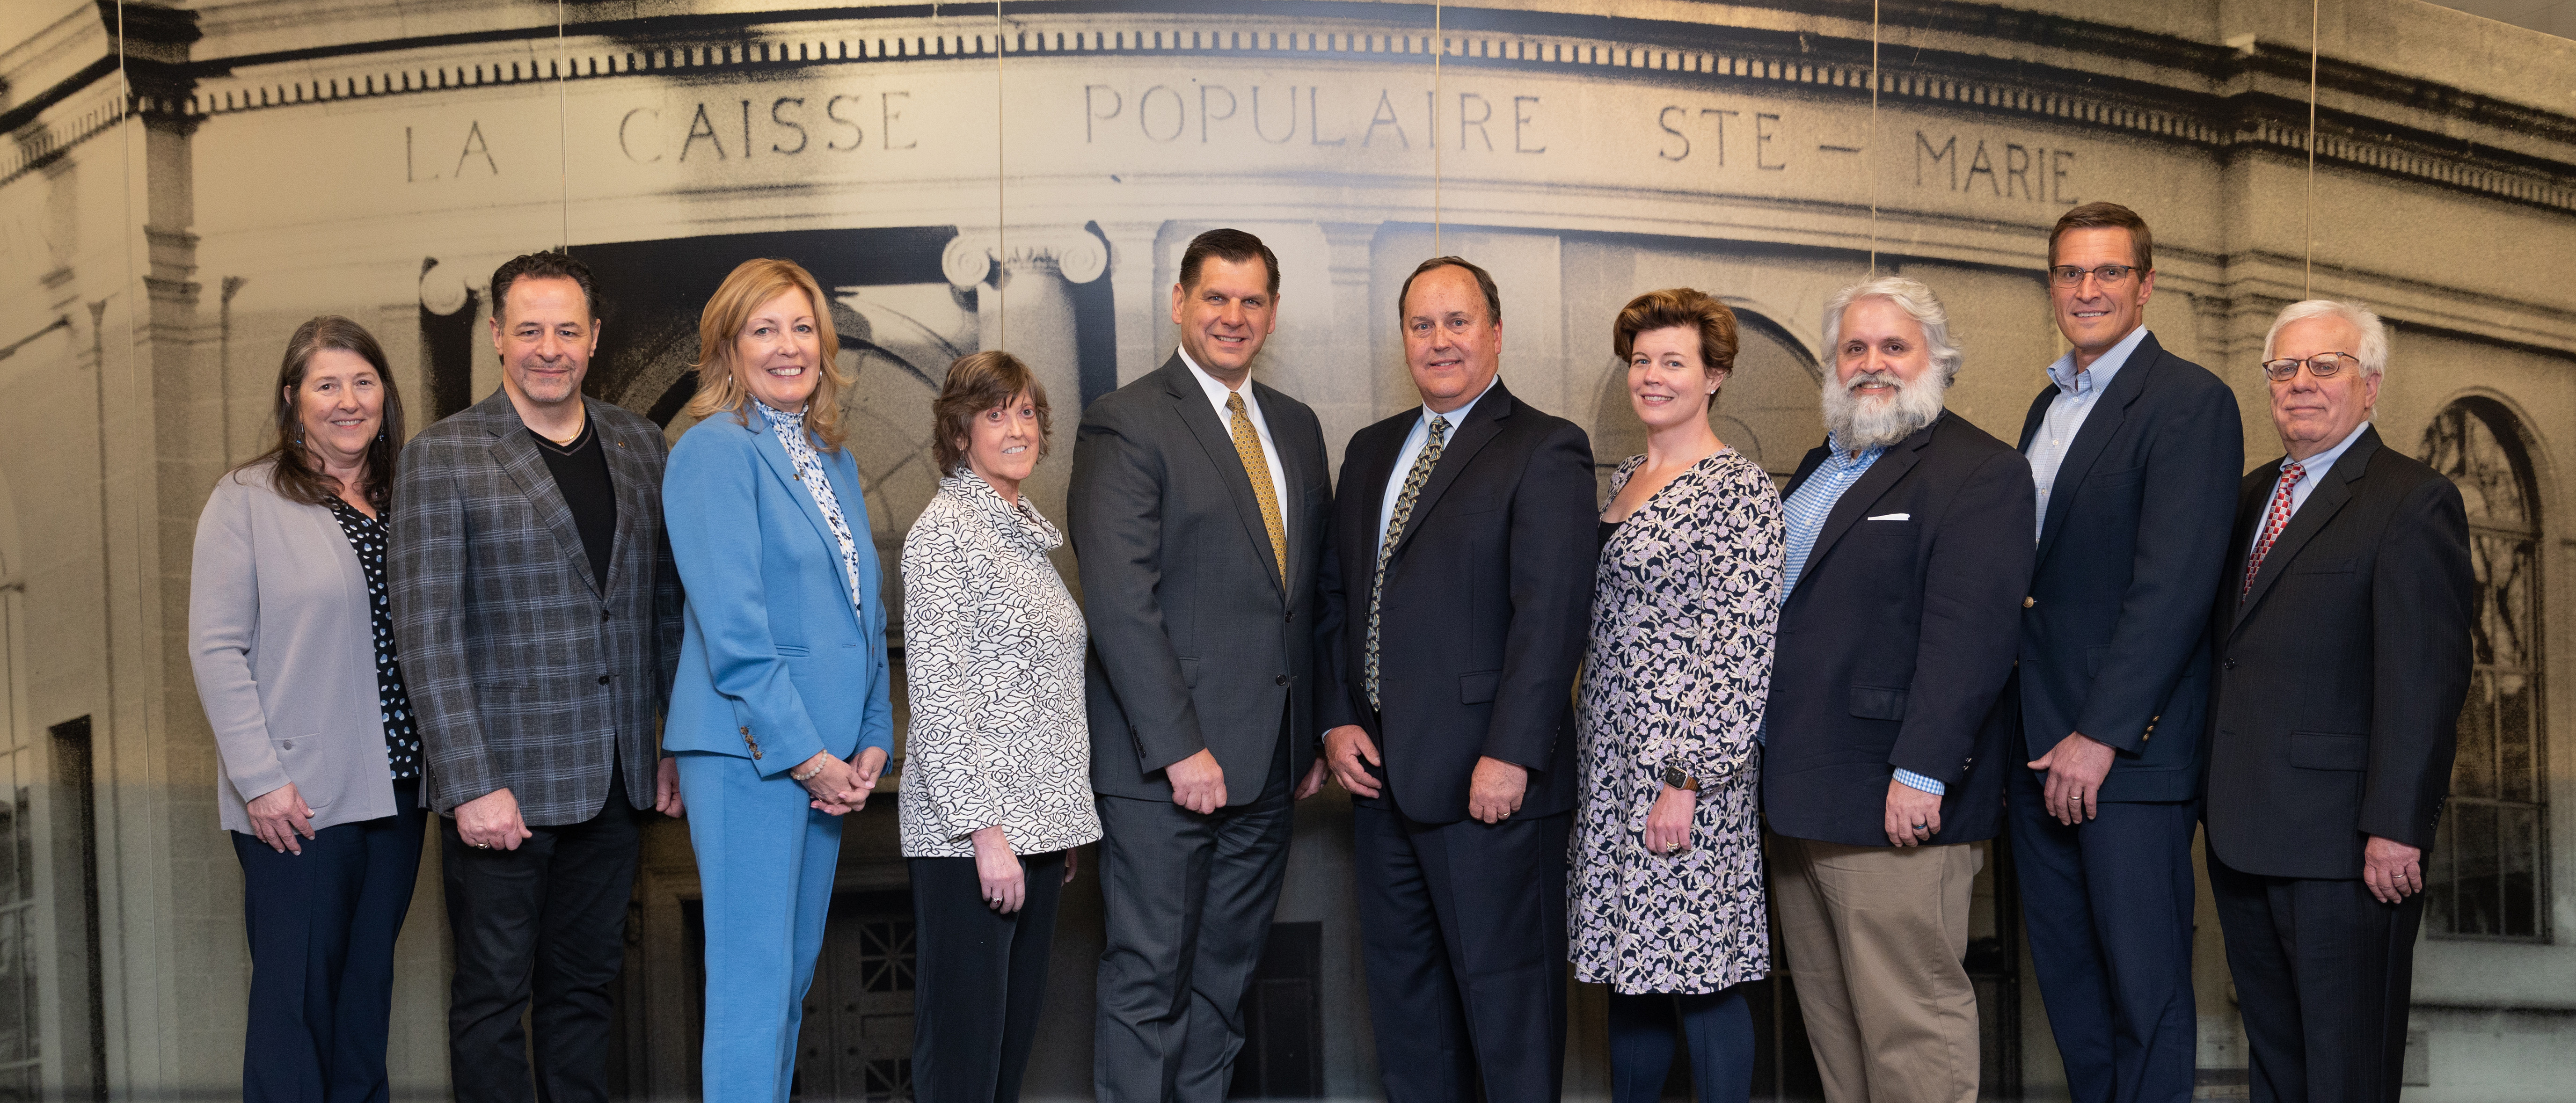 St. Mary's Bank Board of Directors